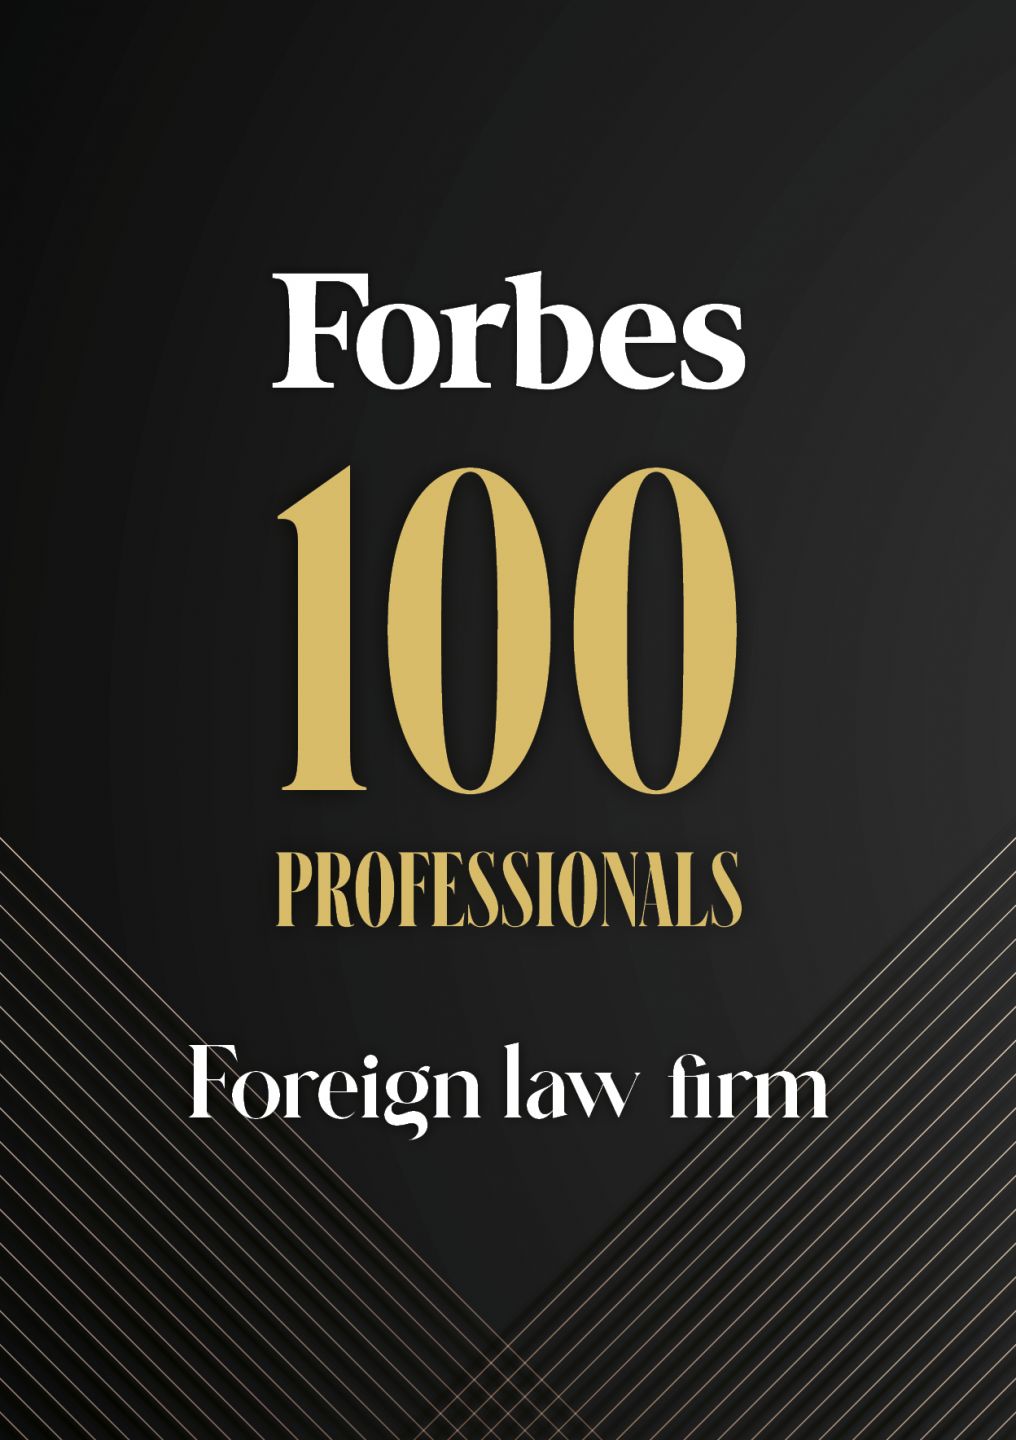 Foreign law firm